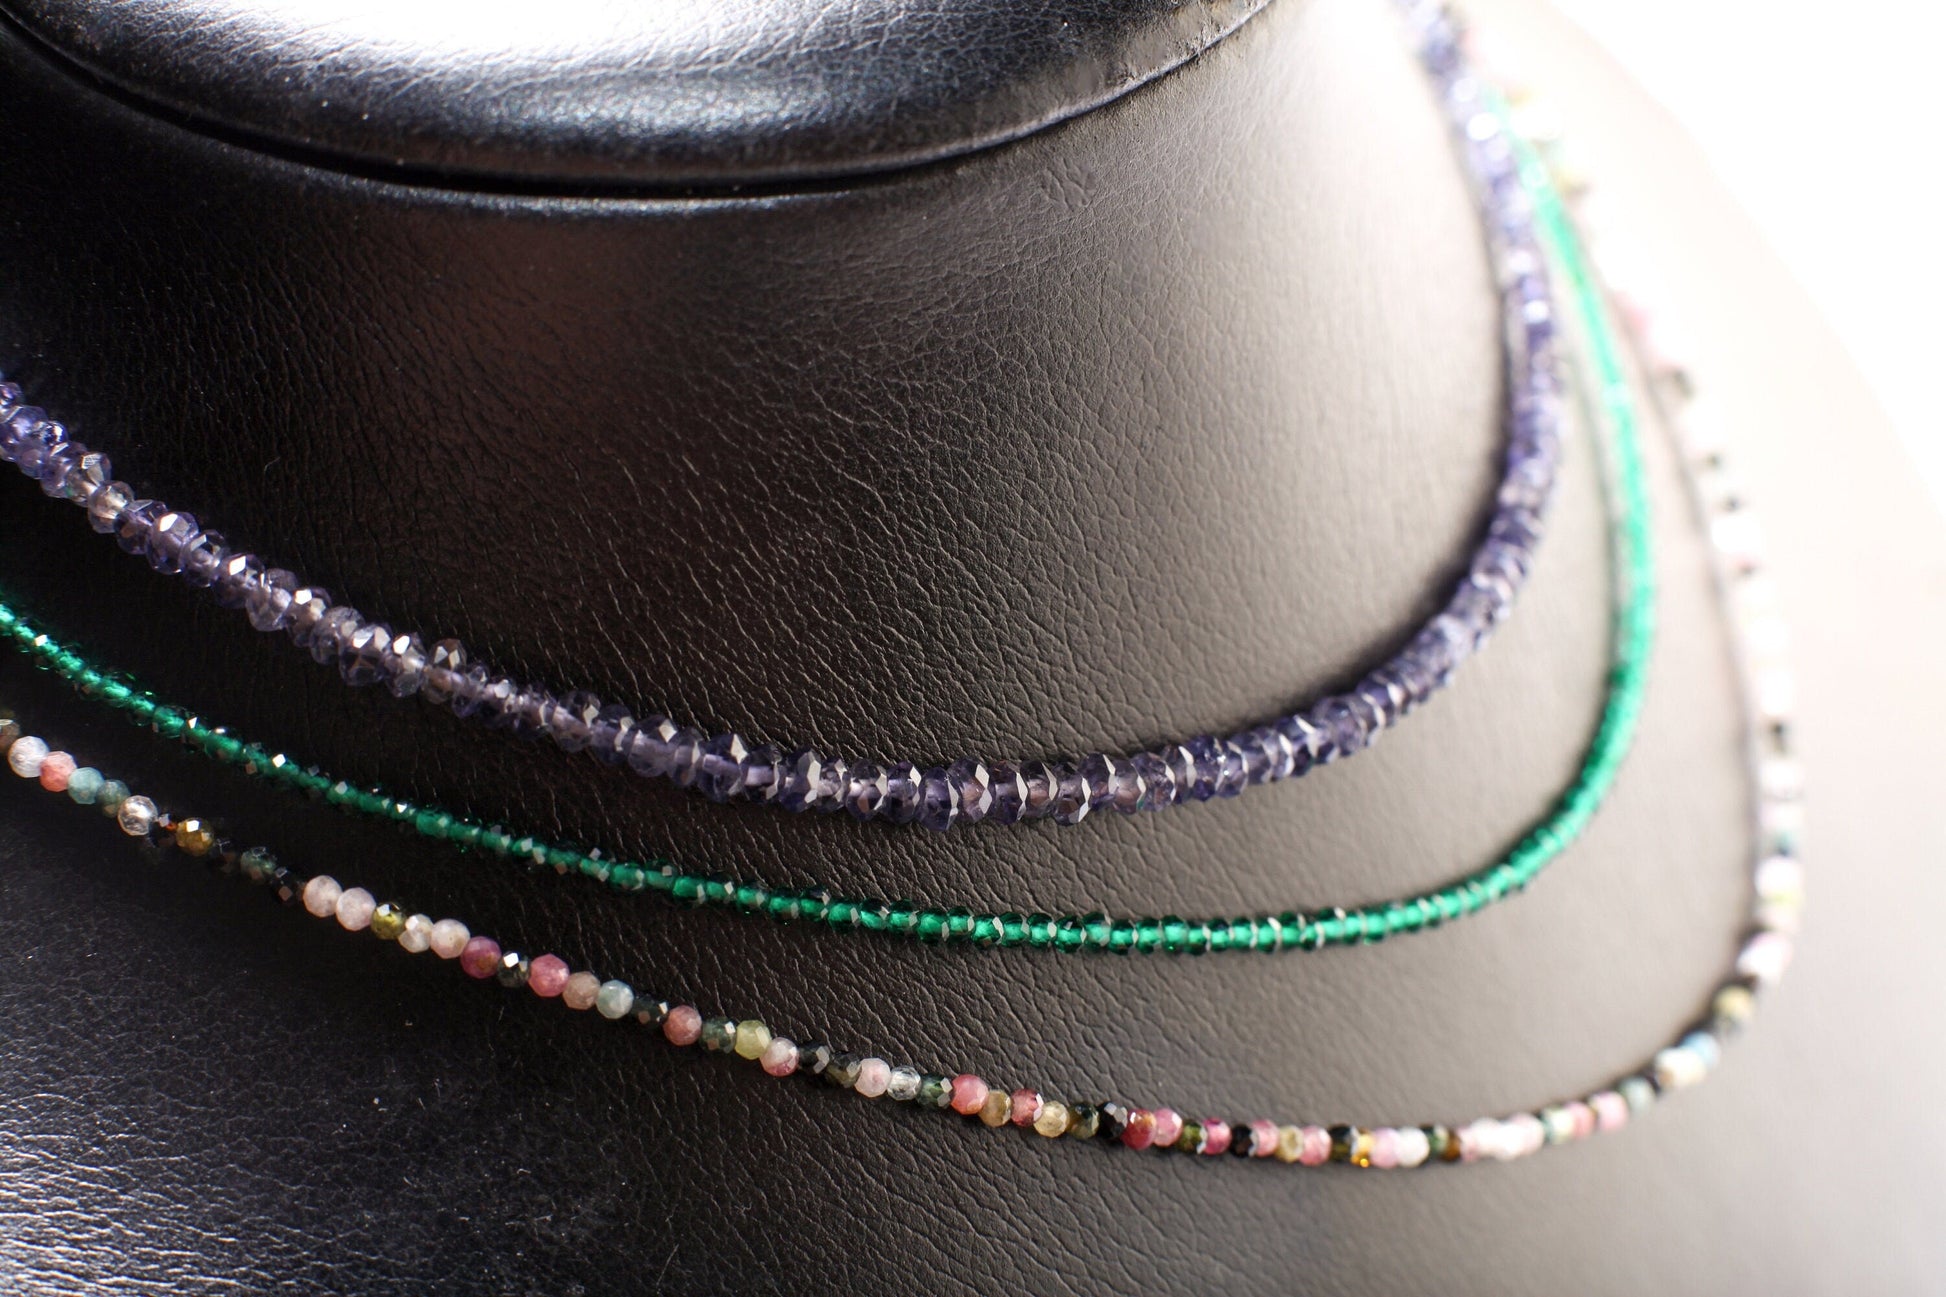 3-3.5mm Faceted Iolite, Emerald Spinel, Multi Watermelon Tourmaline Layering Choker 925 Sterling Silver Necklace, Precious Gemstones